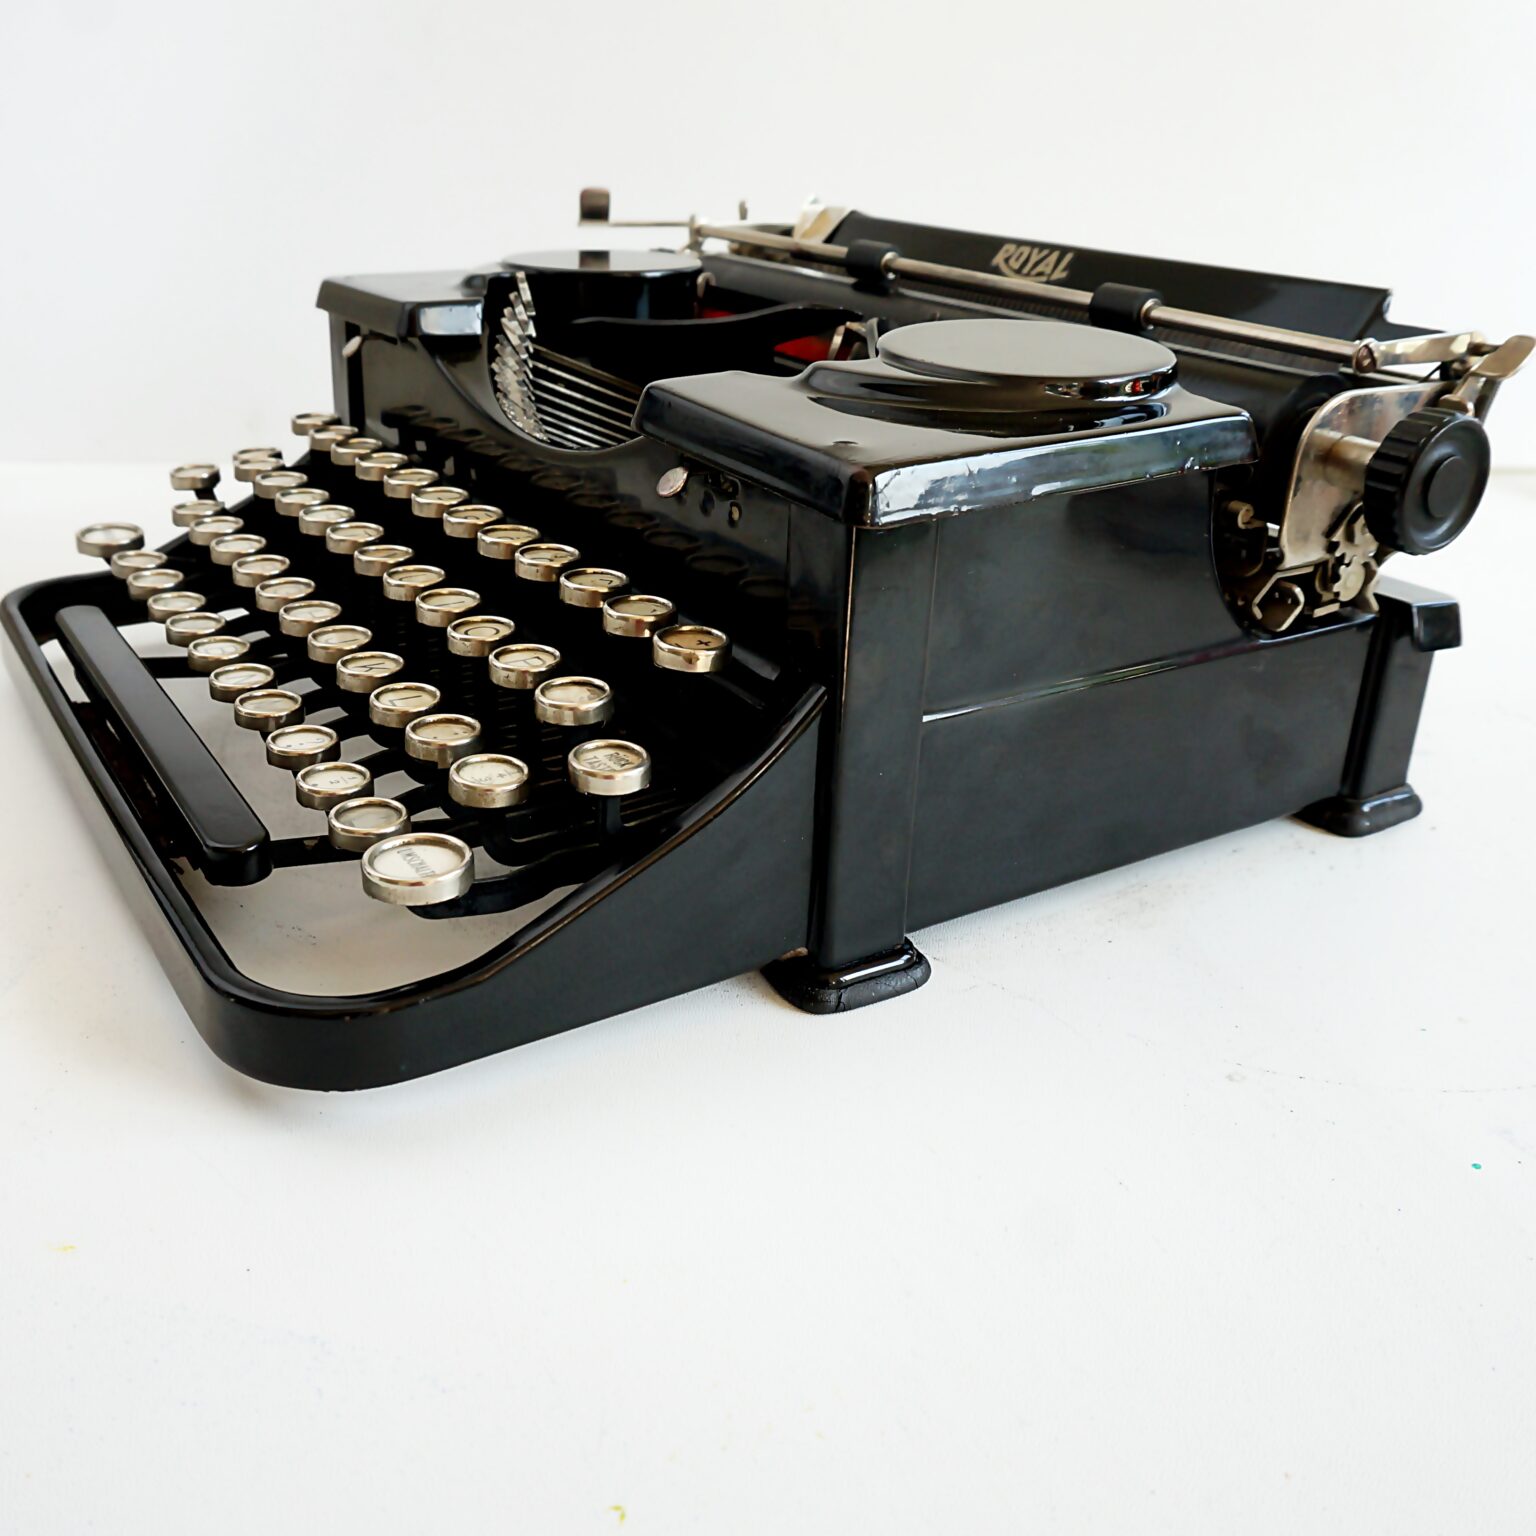 Royal Portable Typewriter For Sale For Sale - My Cup Of Retro Typewriters